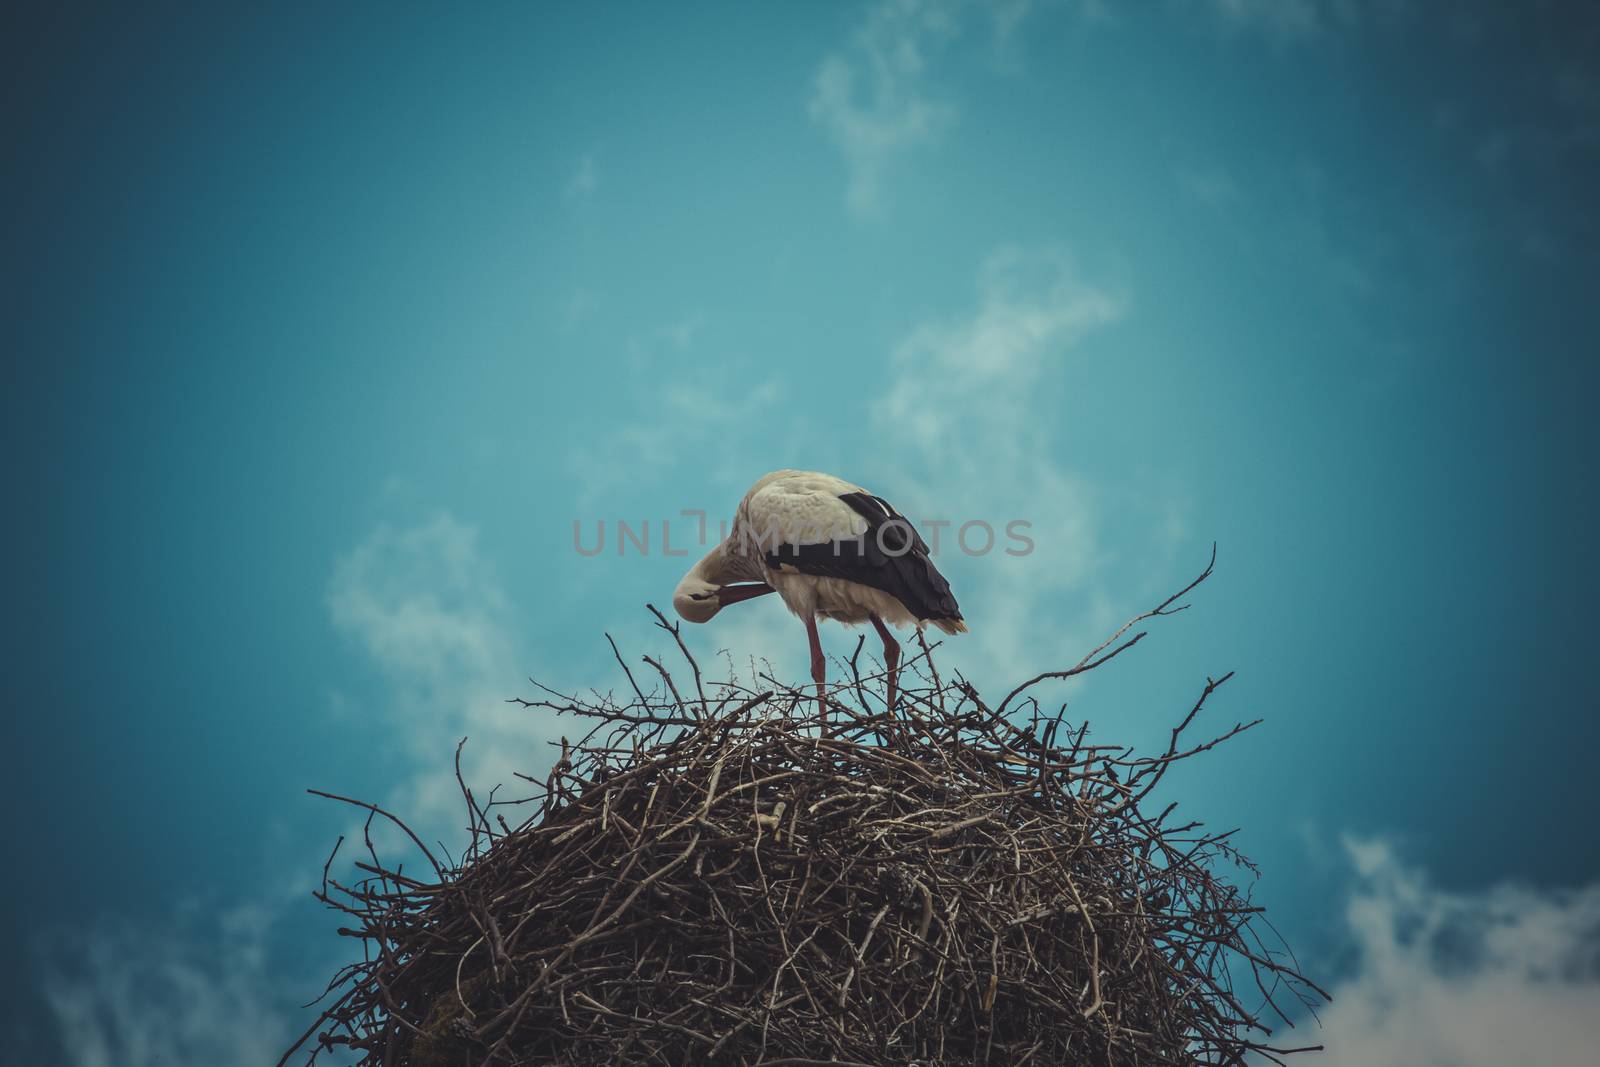 Wild, Stork nest made ������of tree branches over blue sky in dramatic